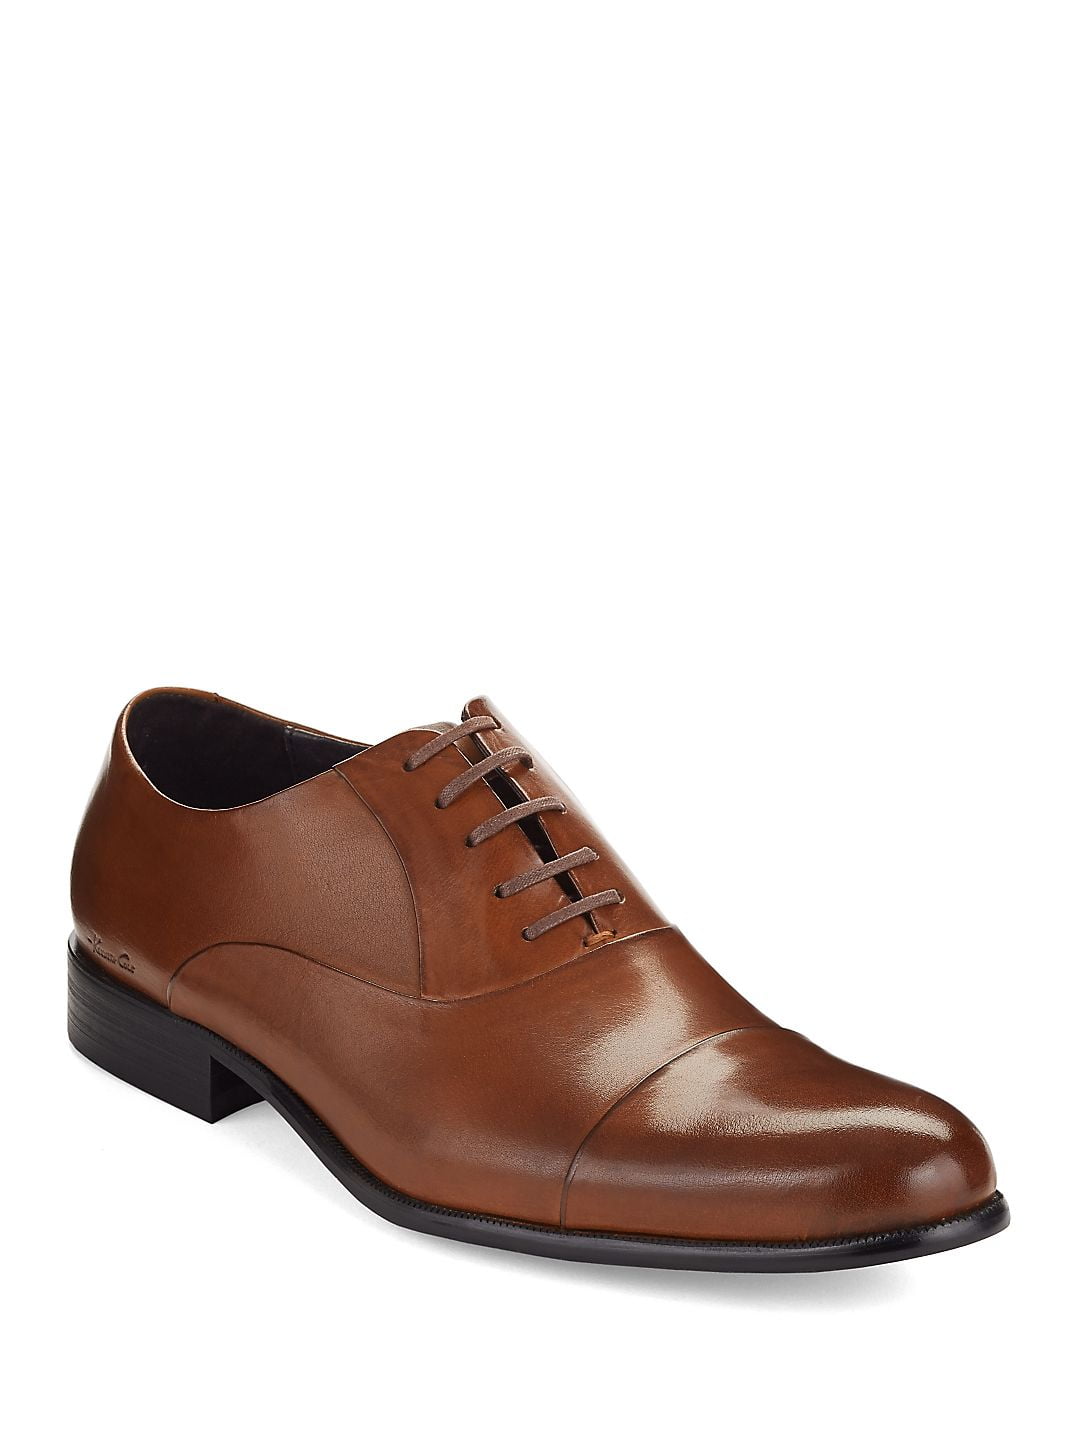 Kenneth Cole New York Mens Chief Council Oxford 